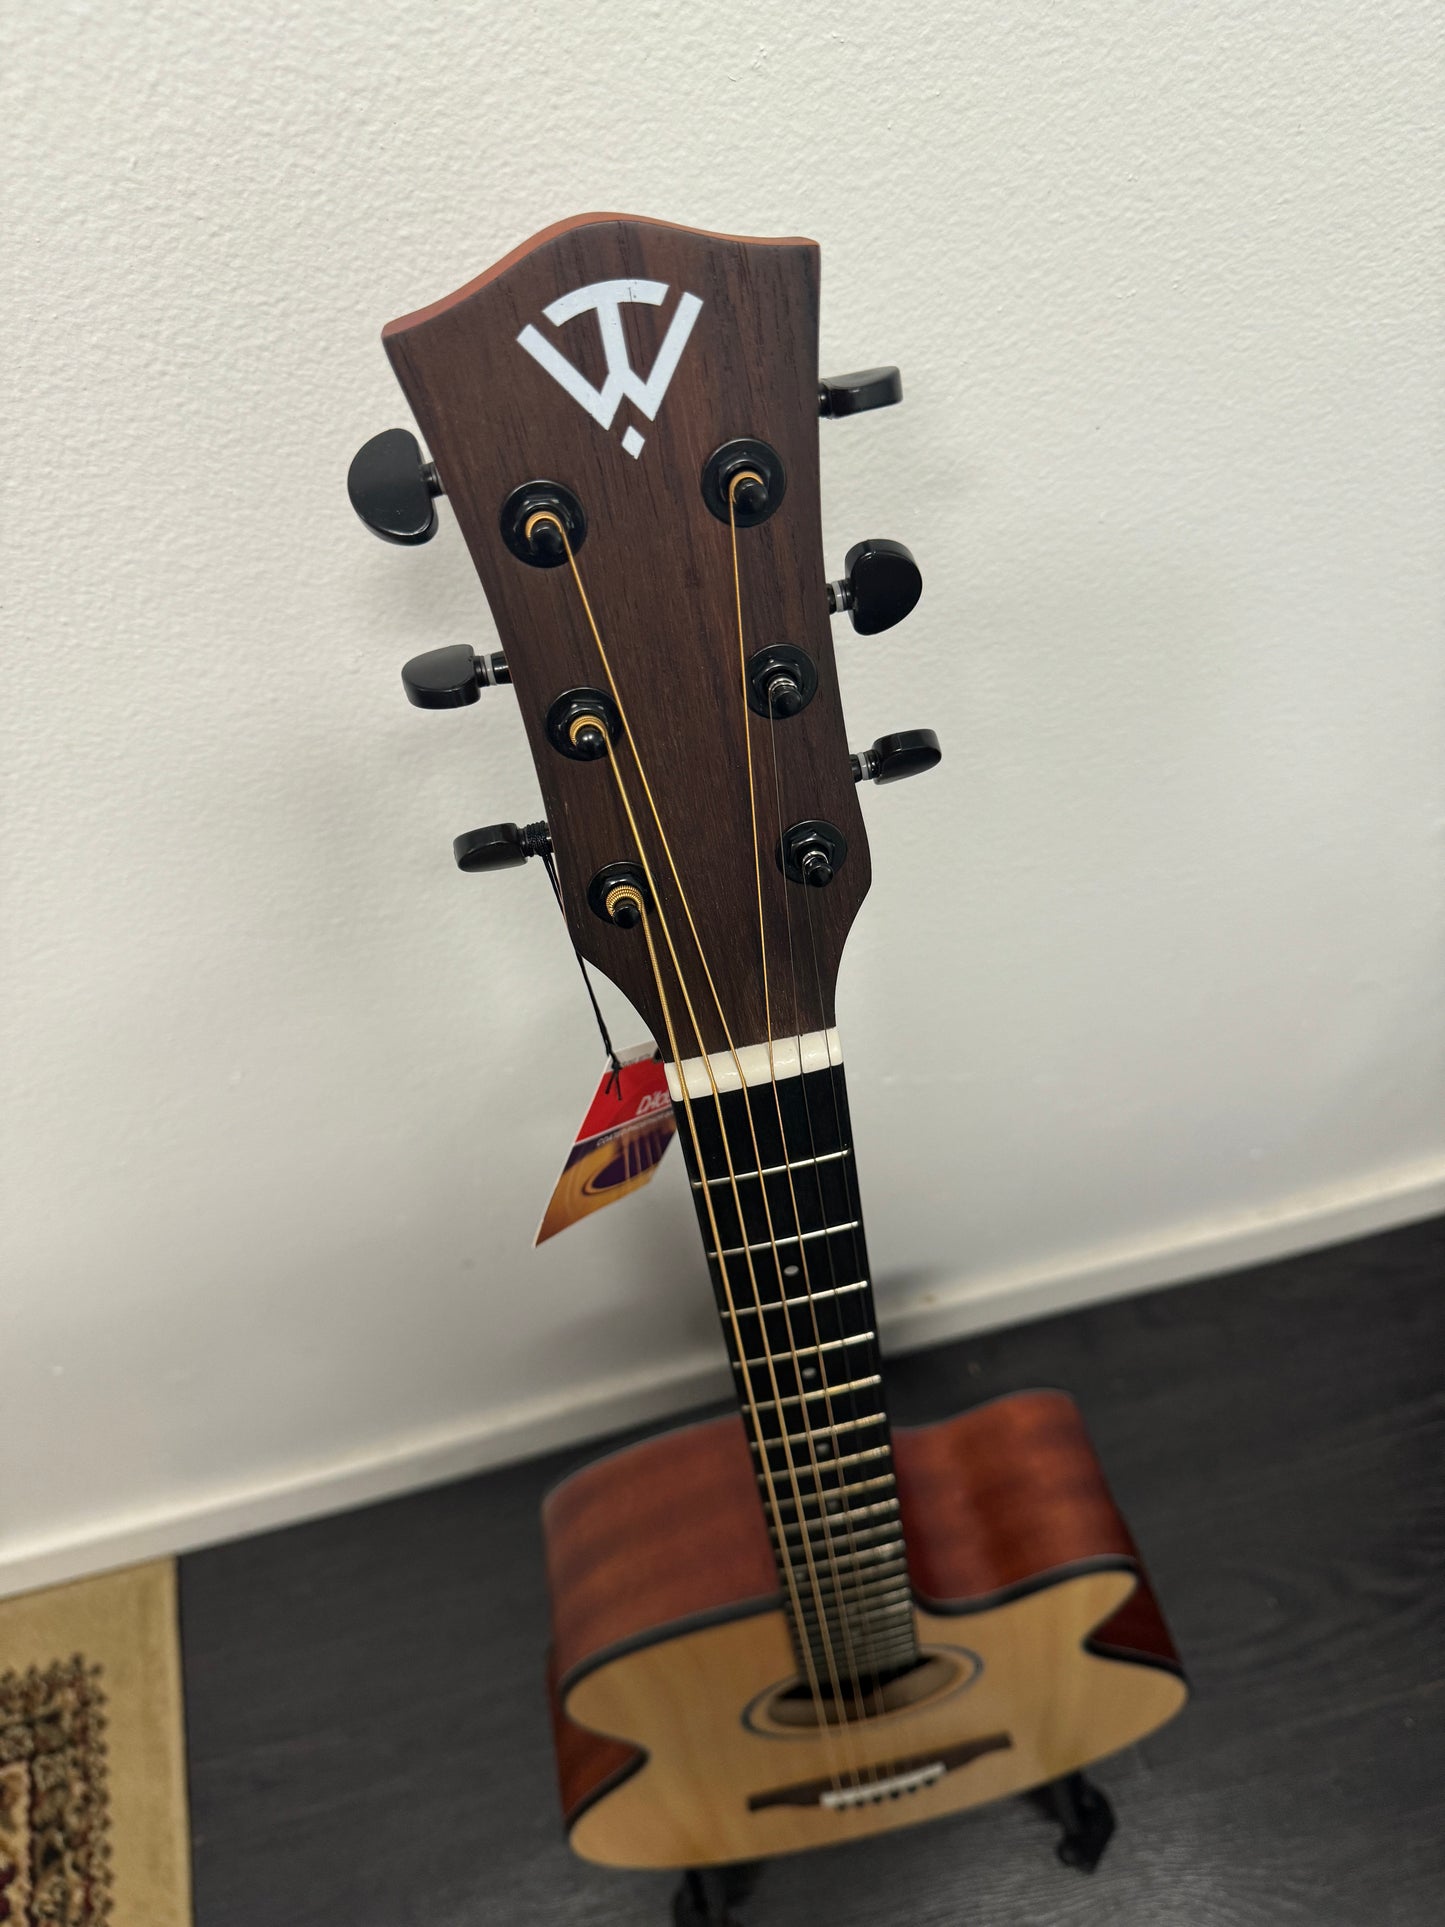 Twisted Wood Drifter Series Acoustic Guitar DR-240-CS